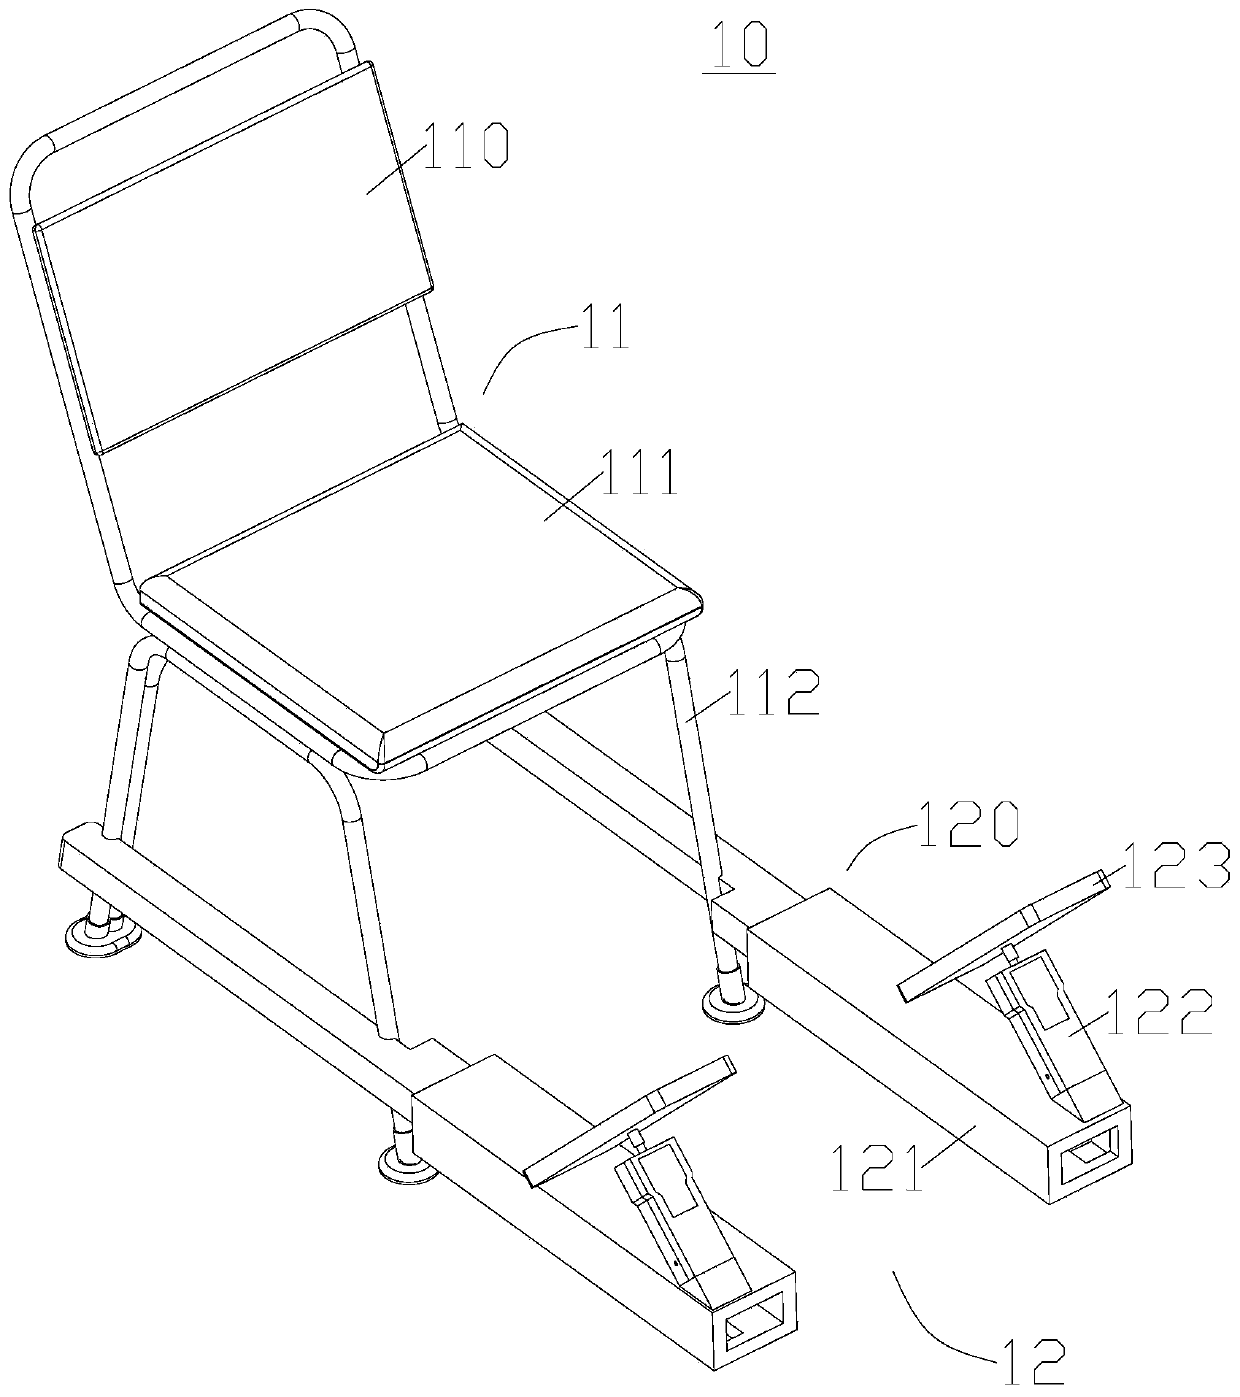 Force measuring seat for leg muscles